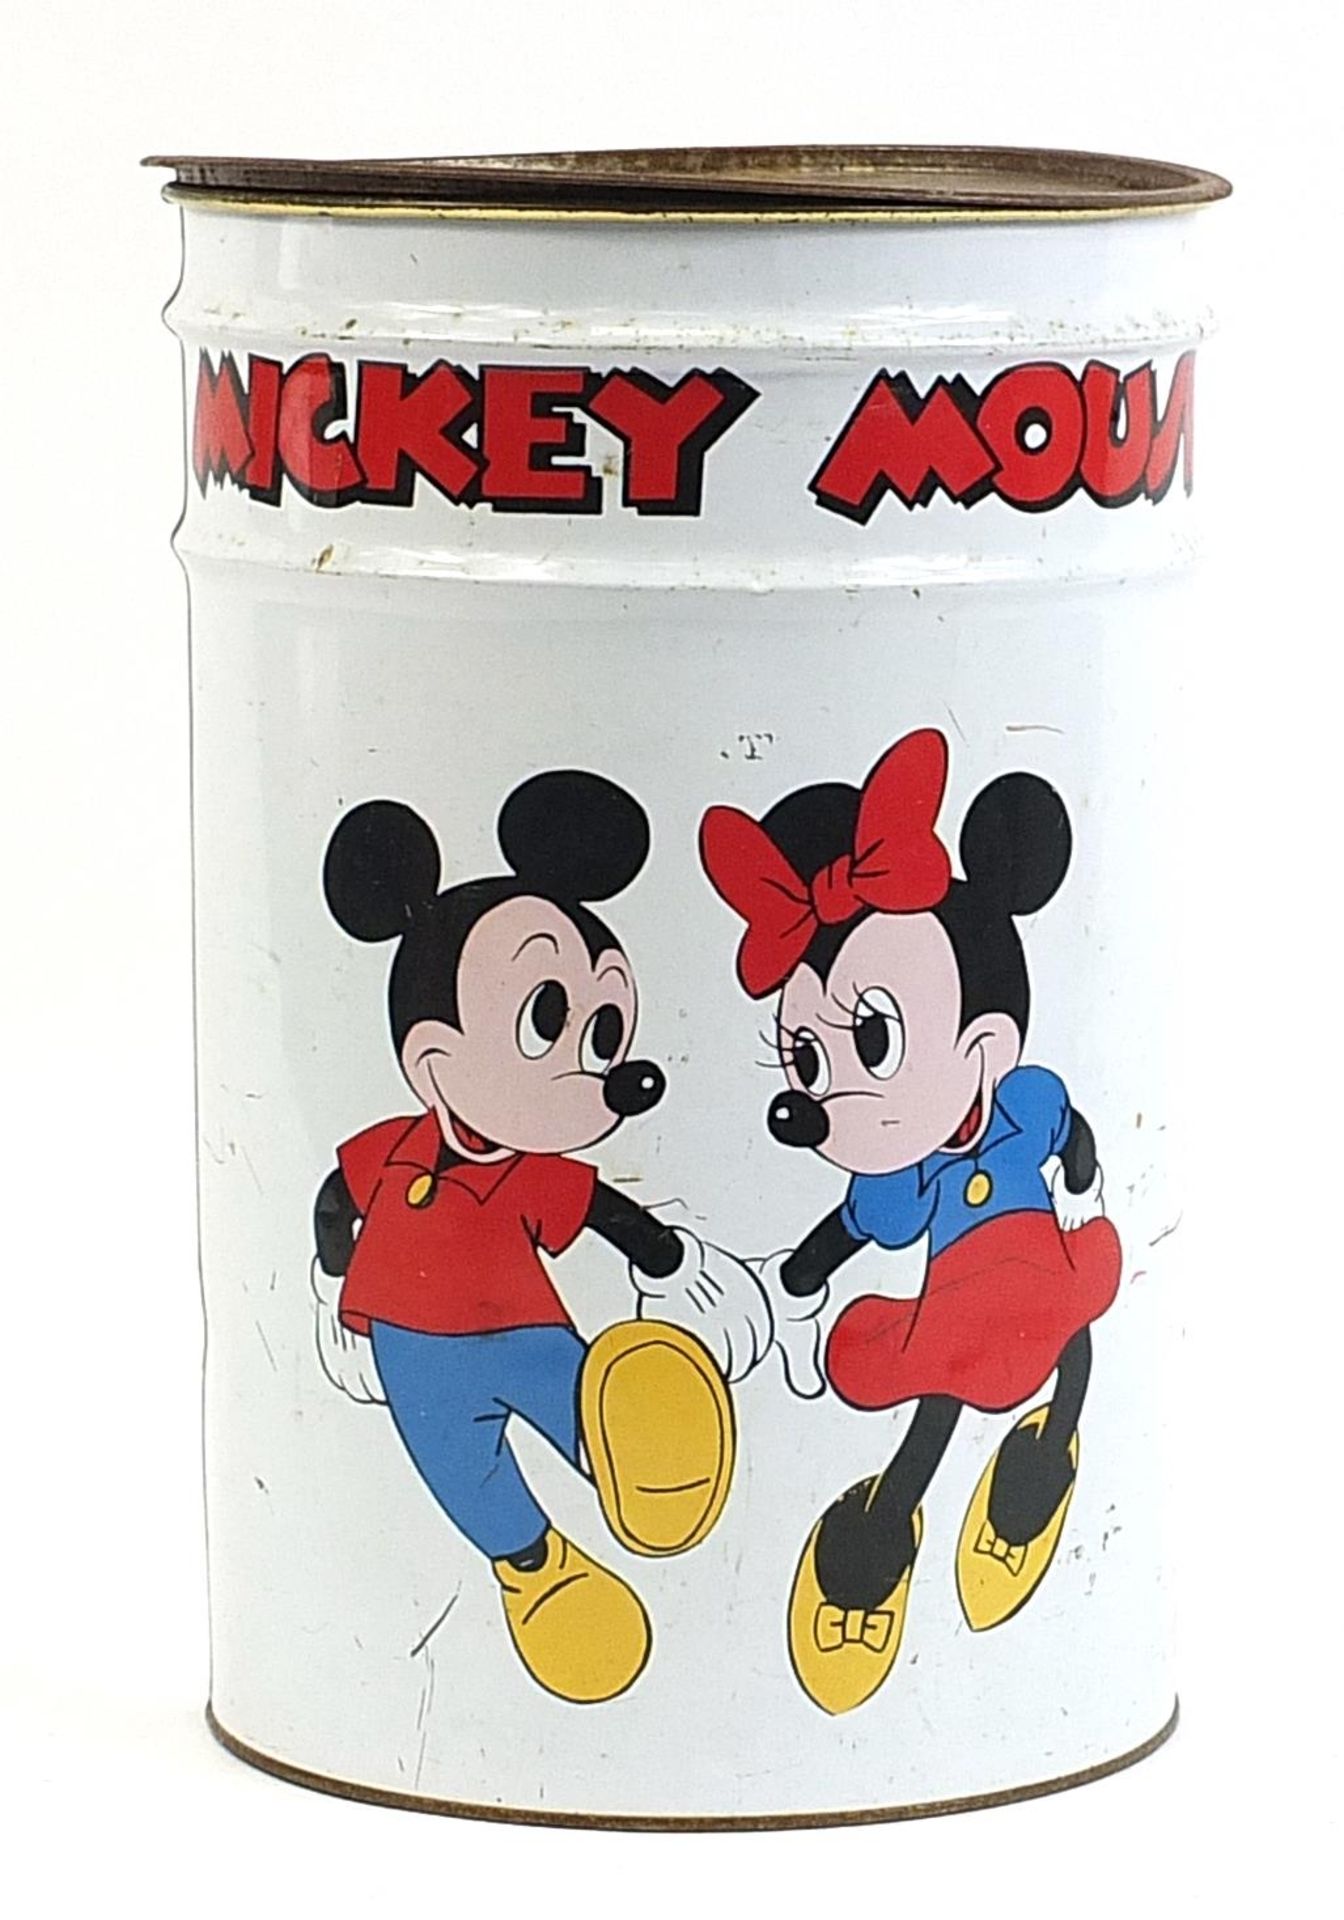 Vintage Mickey and Minnie Mouse tin waste paper bin, 45cm high x 31cm in diameter - Image 2 of 3